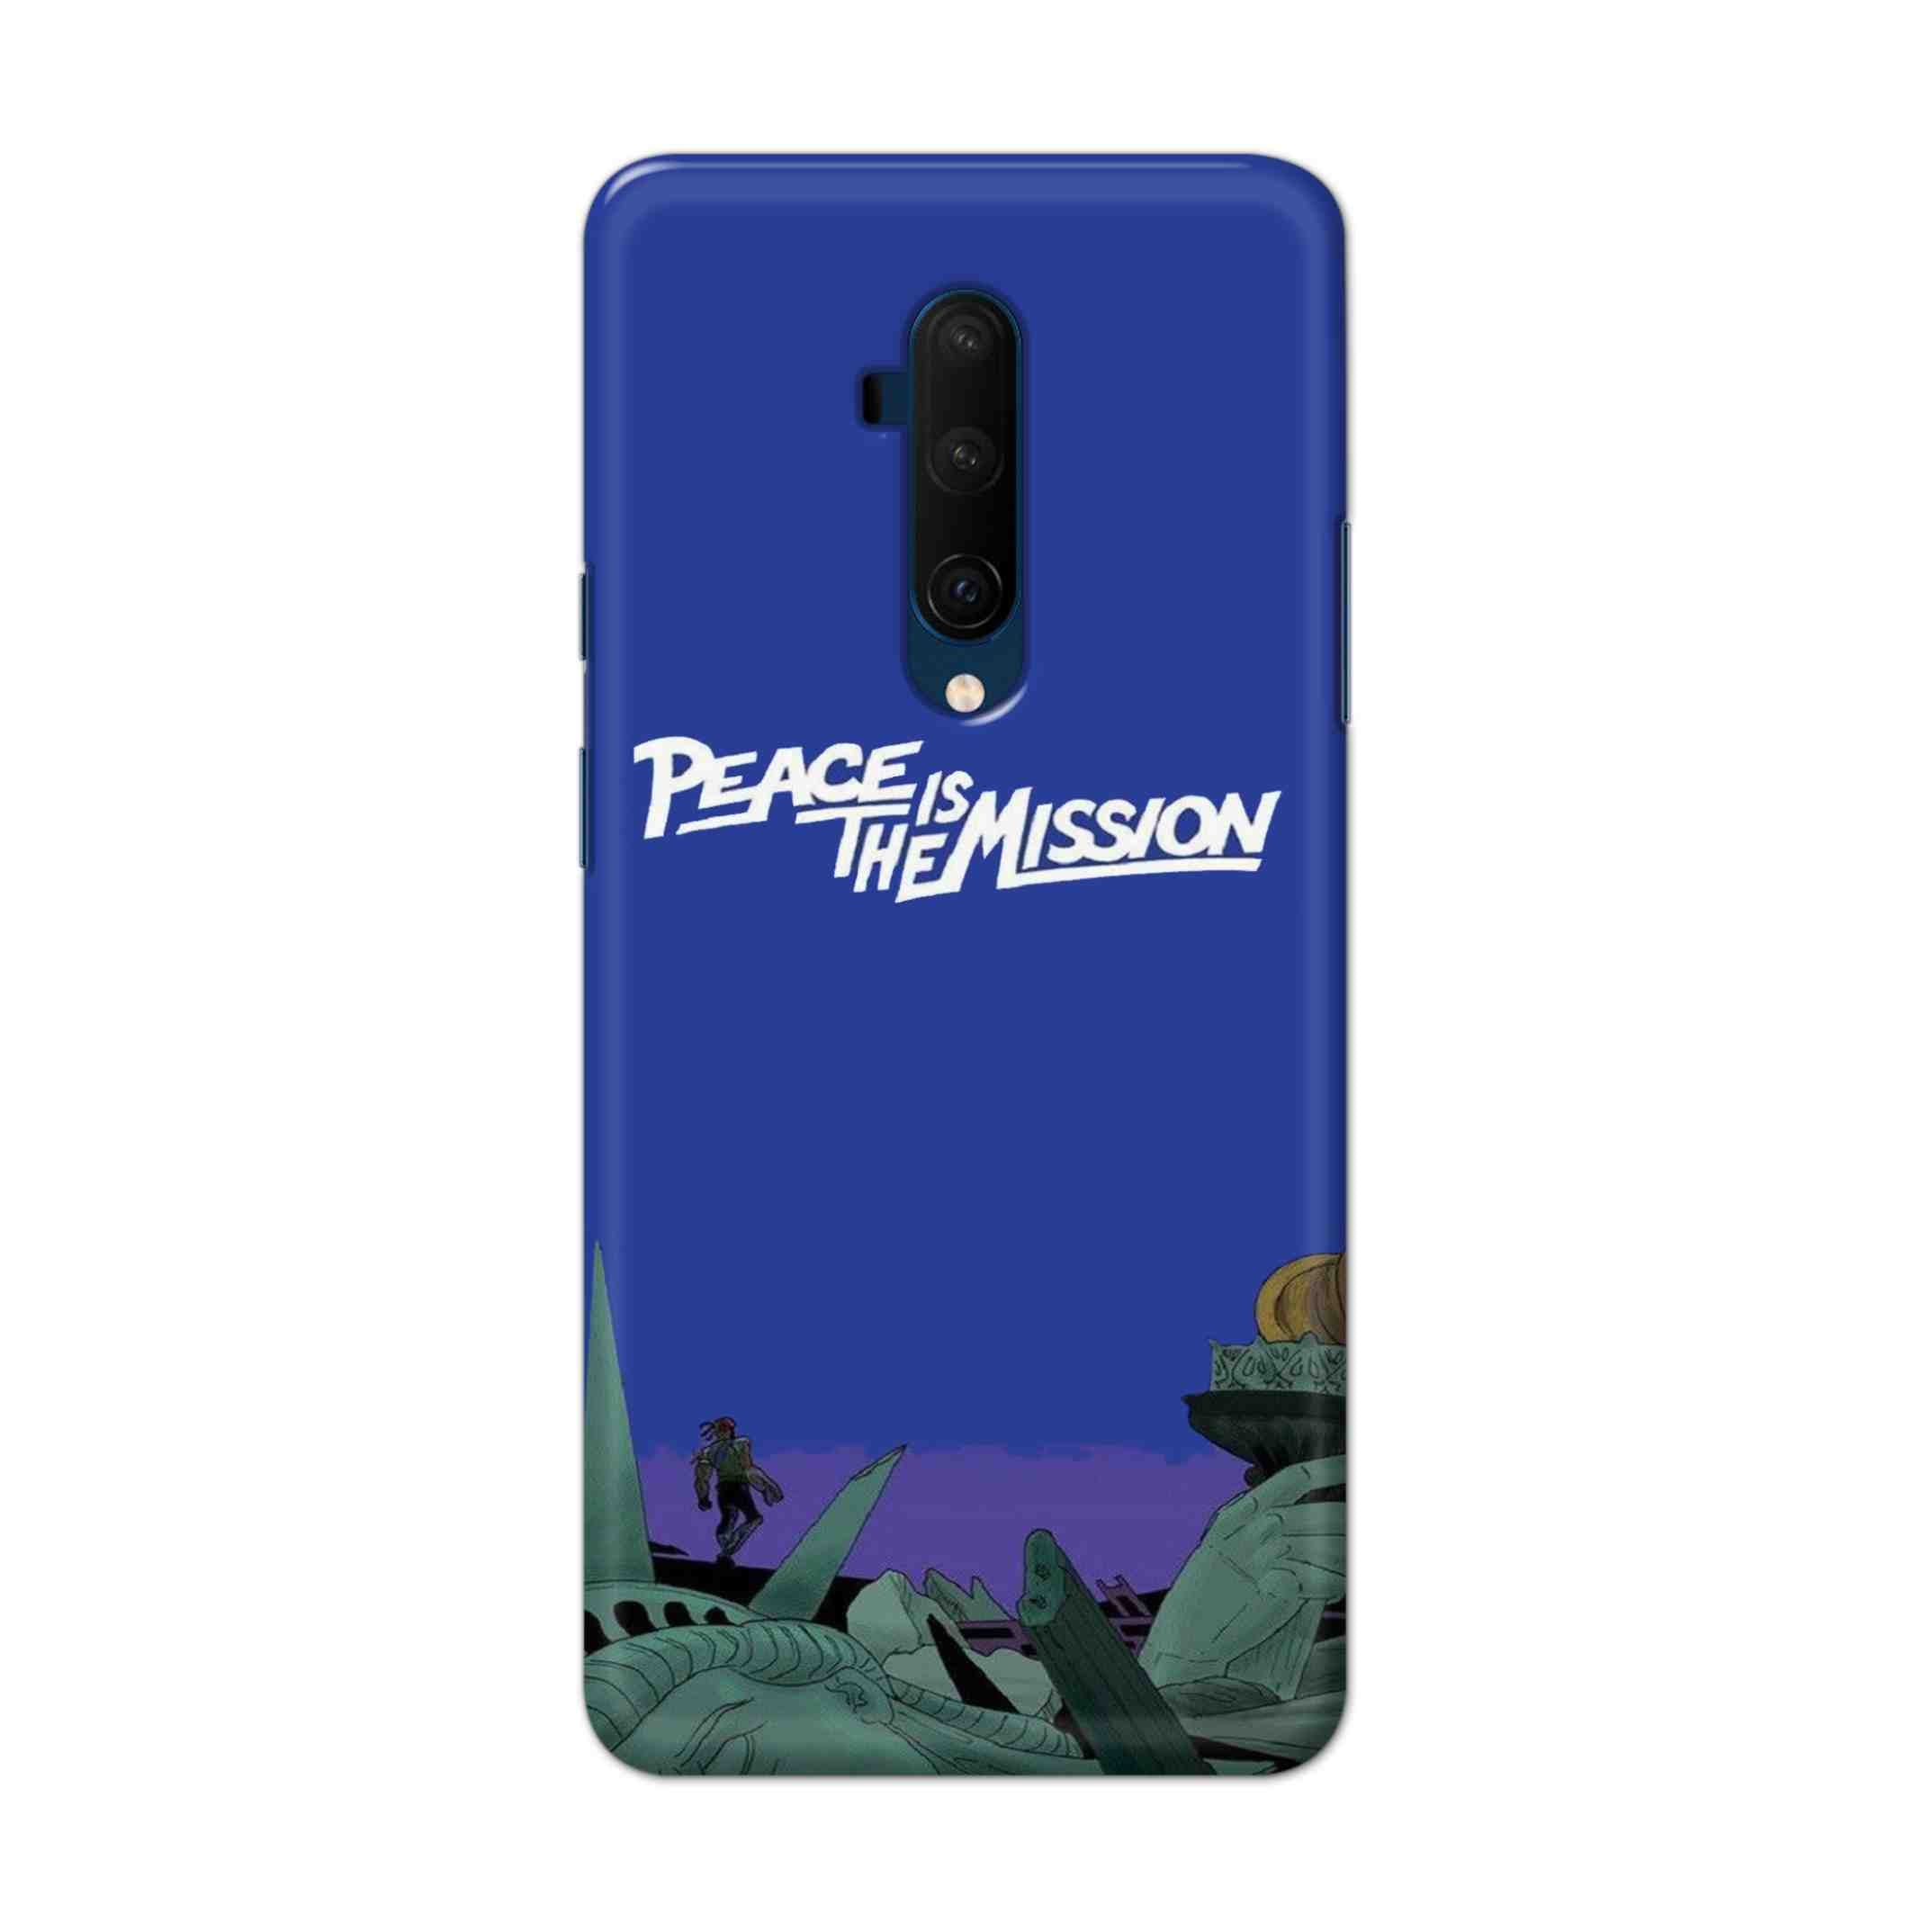 Buy Peace Is The Misson Hard Back Mobile Phone Case Cover For OnePlus 7T Pro Online